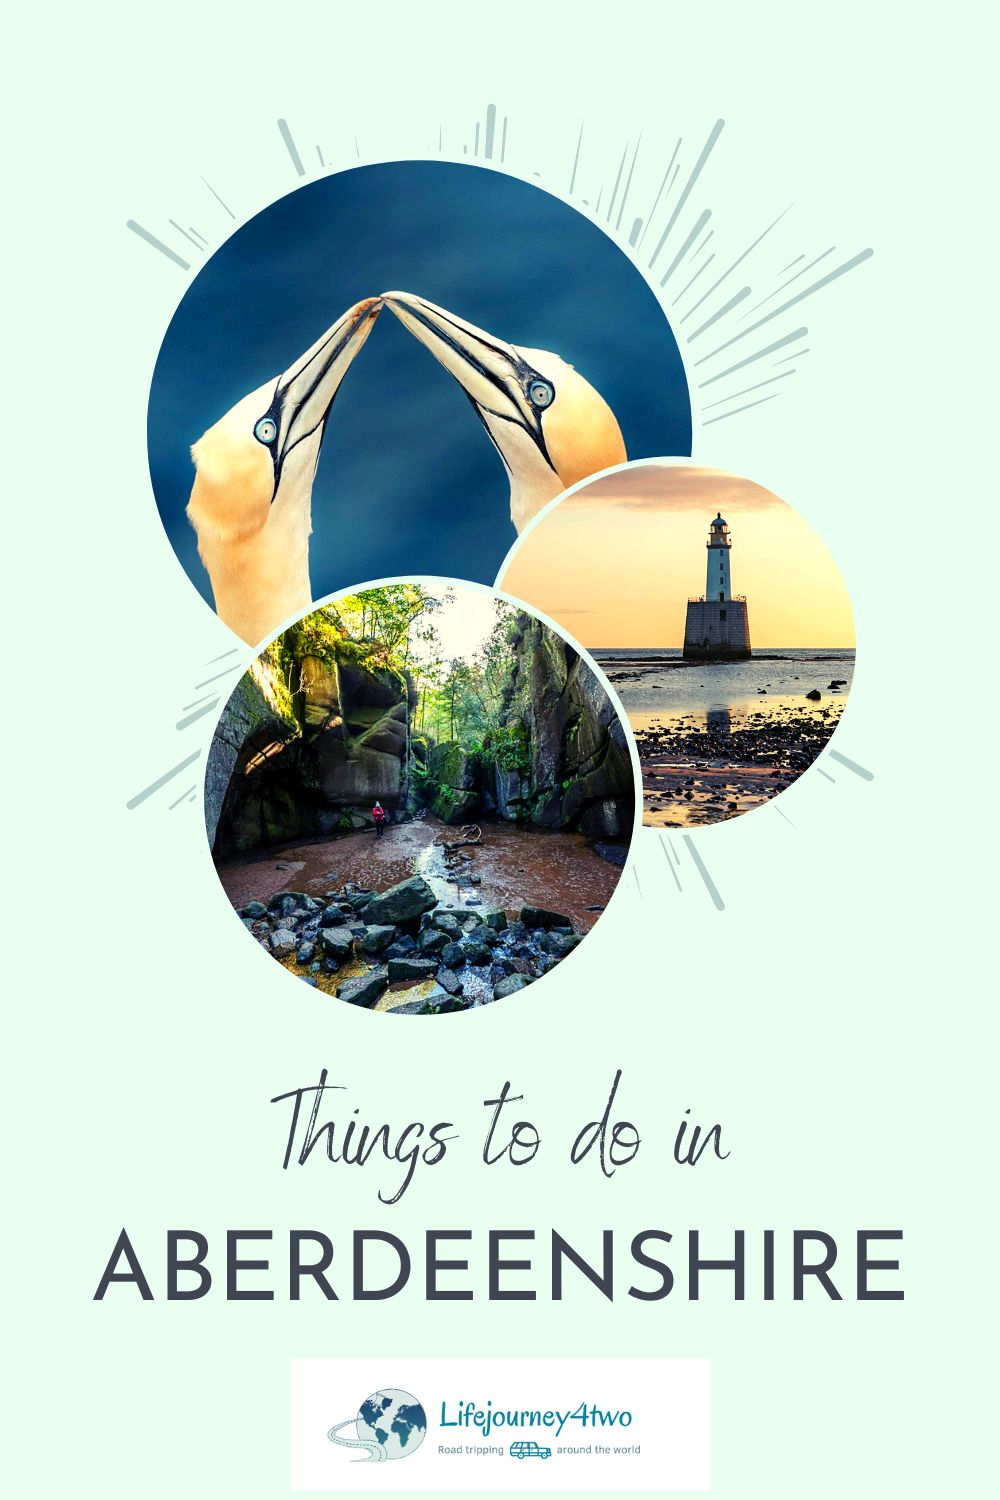 Things to do in Aberdeenshire Pinterest pin